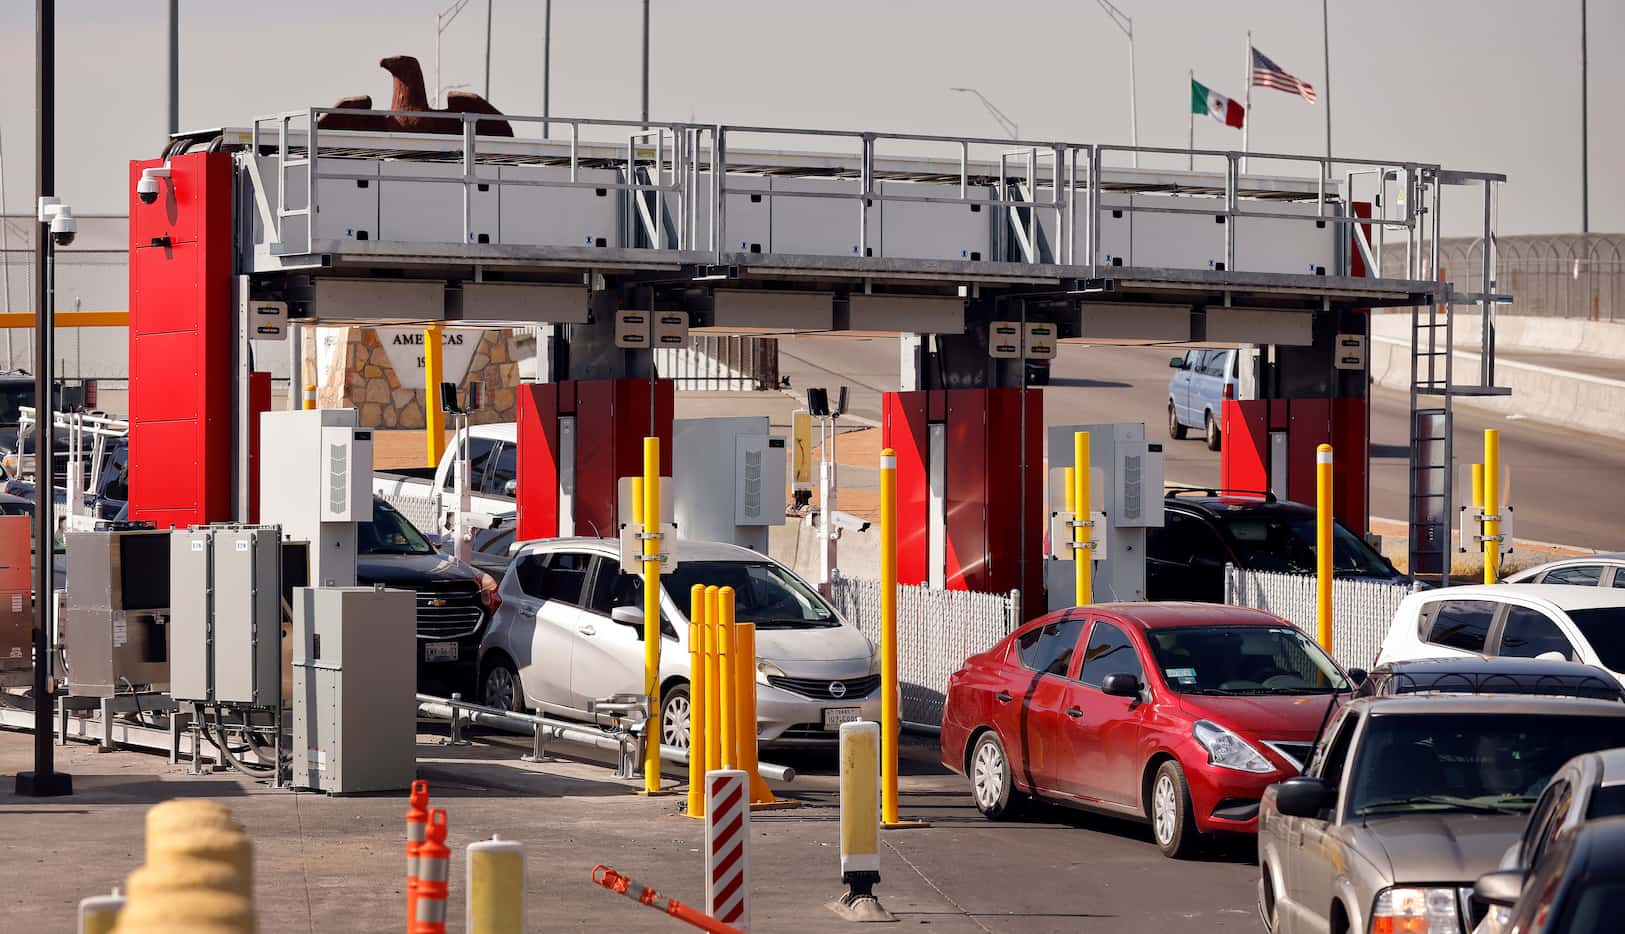 U.S. Customs and Border Protection is testing a Low Energy Portal (LEP) scanning system at...